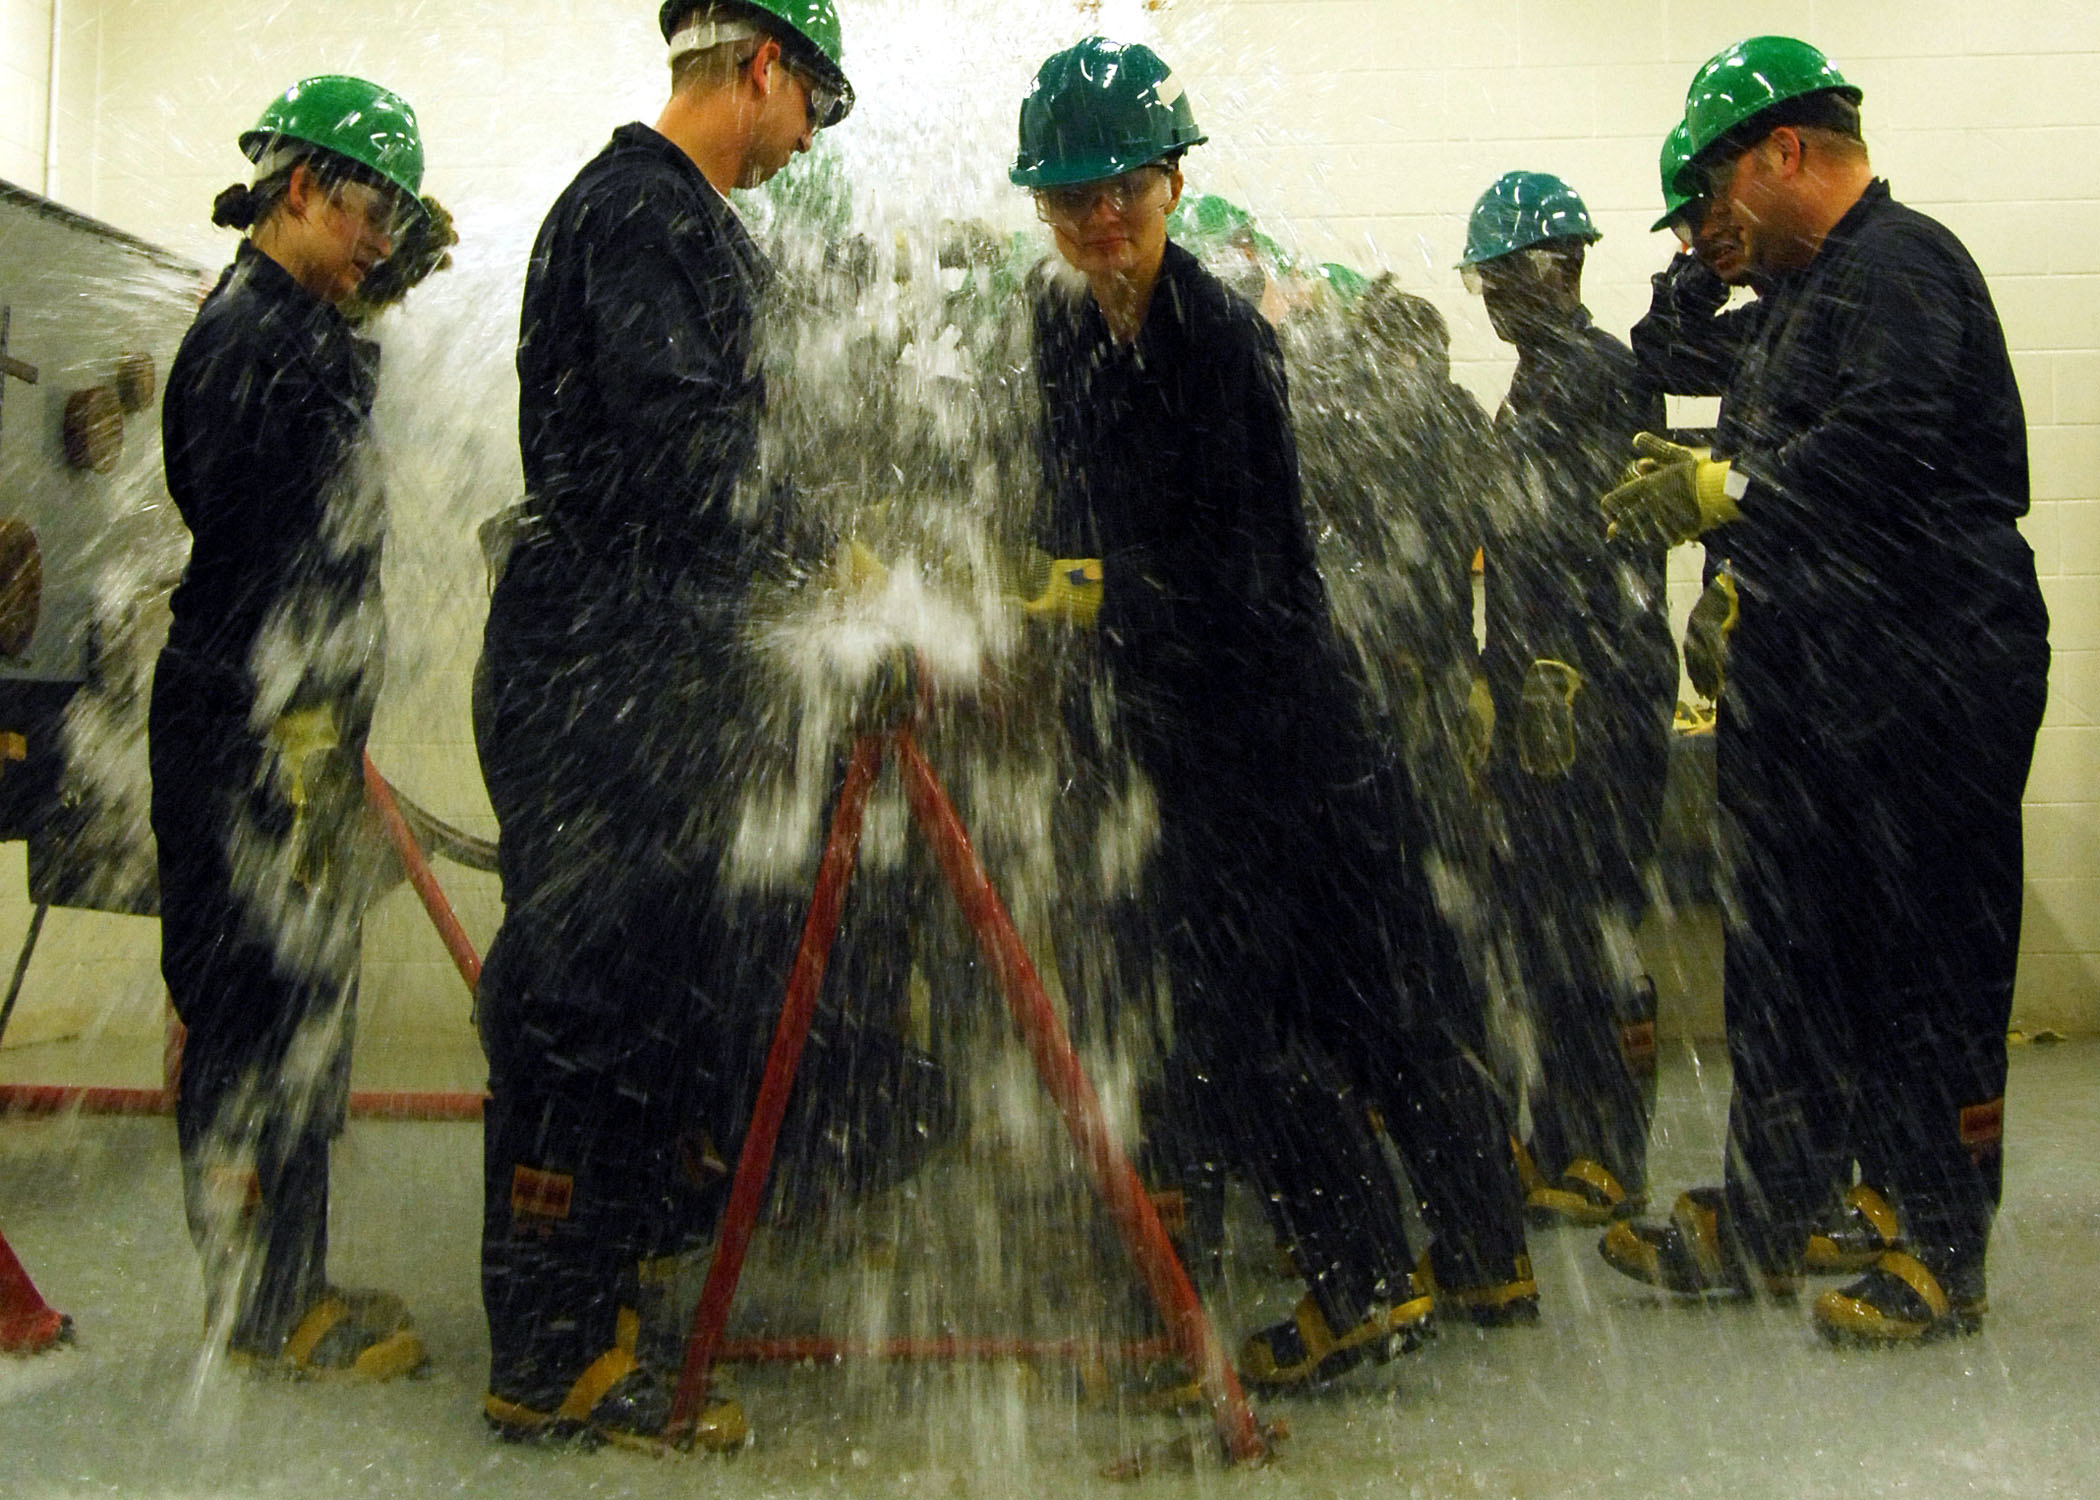 Defense.gov News Photo 110715-N-YC845-428 - First class petty officers from Naval Support Activity Norfolk commands train at the Farrier Firefighting School damage control wet trainer USS